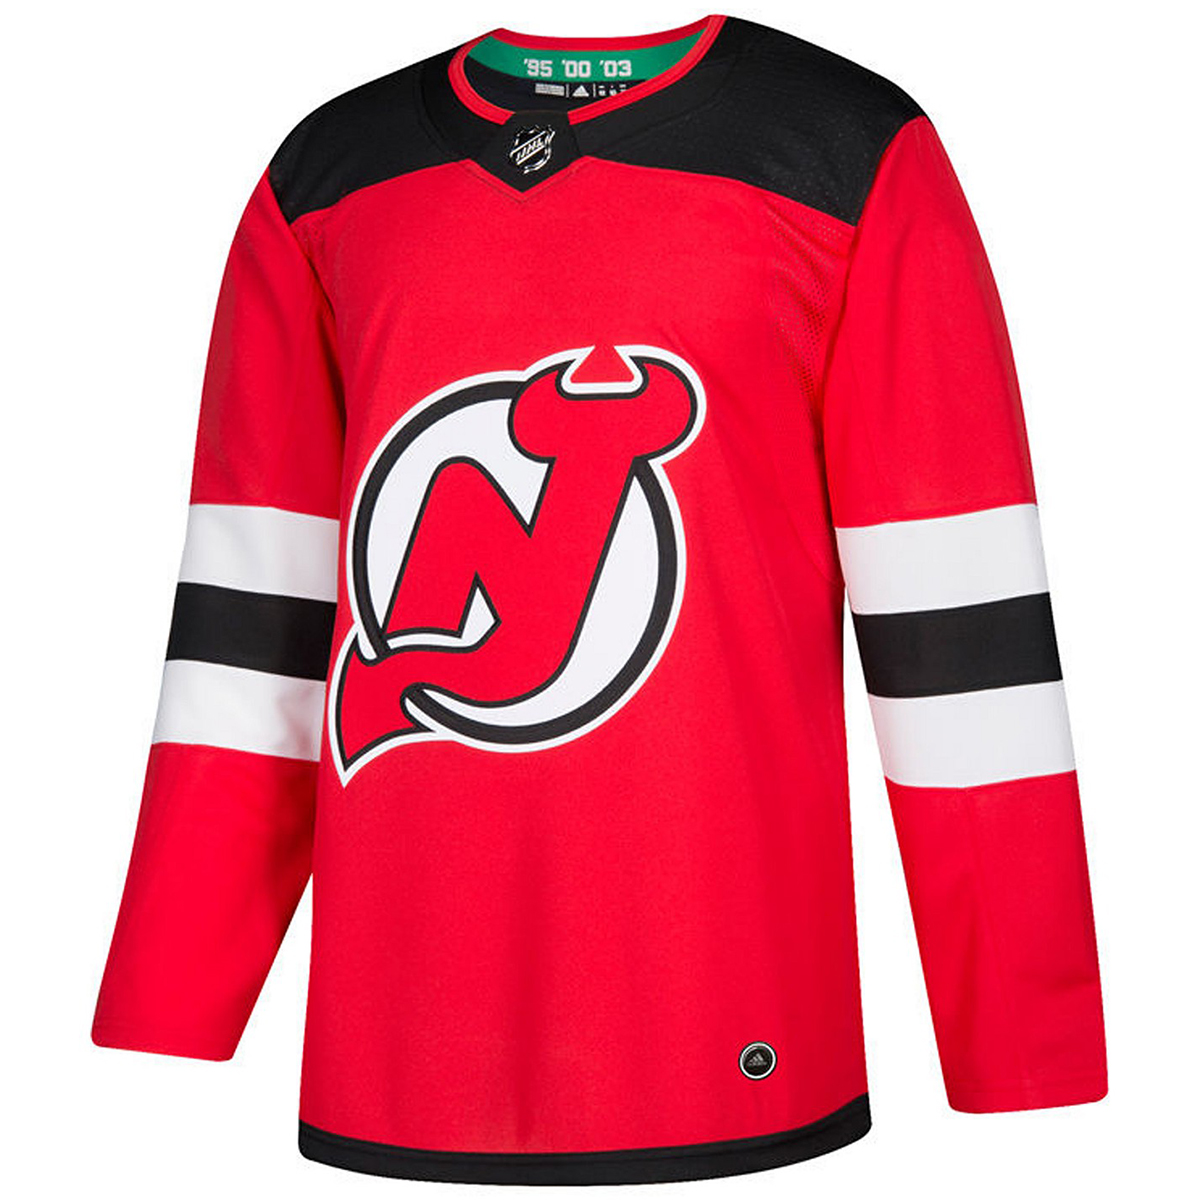 Adidas Men's New Jersey Devils Authentic Pro Home Jersey, Red